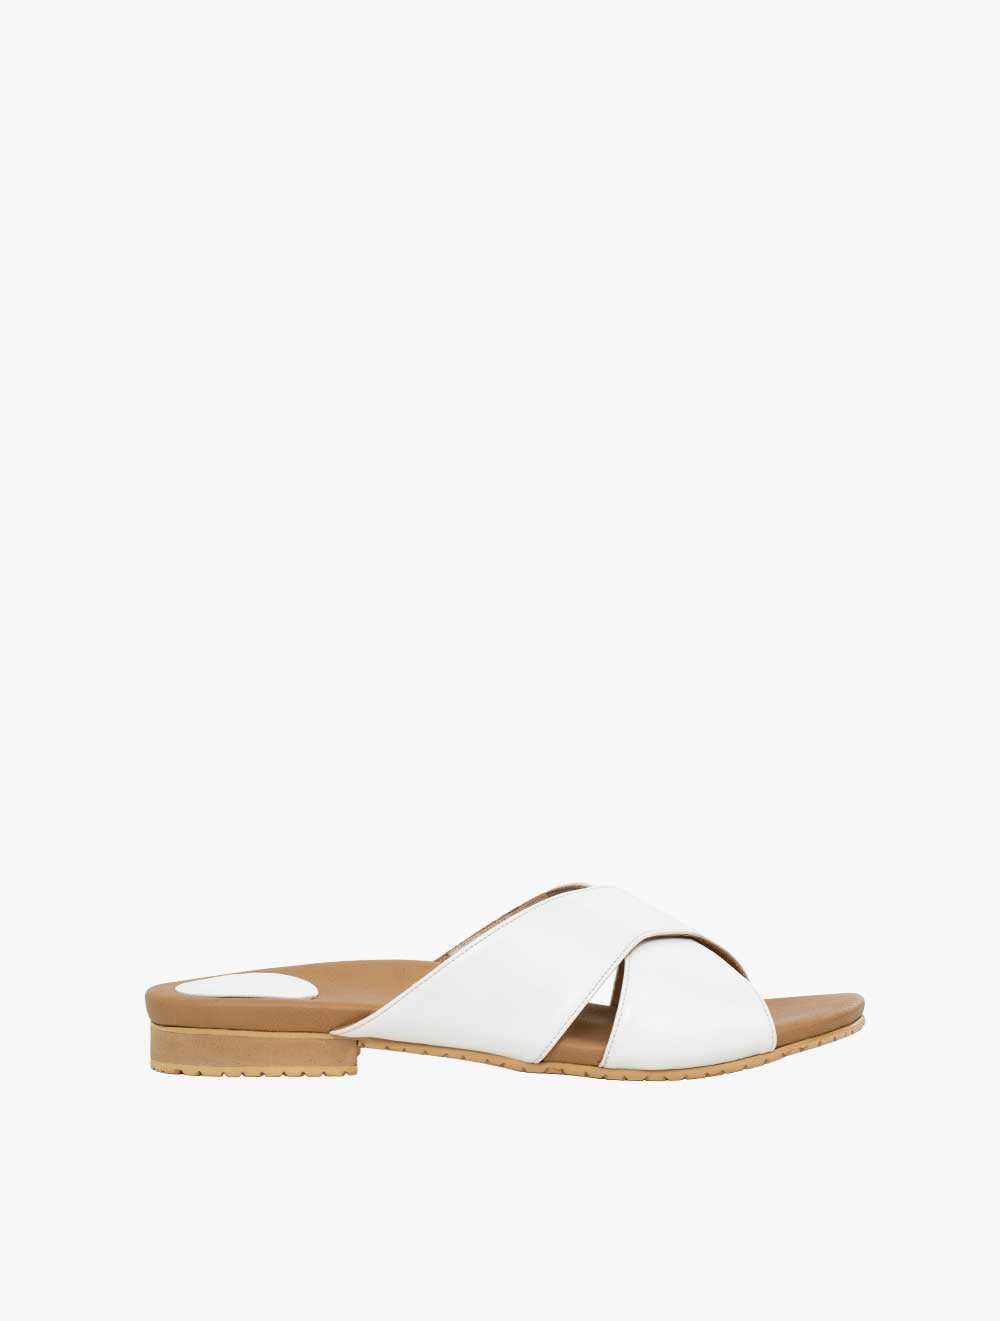 WIMO
Orthopaedic - Gold Ankle Strap - High Stilletto